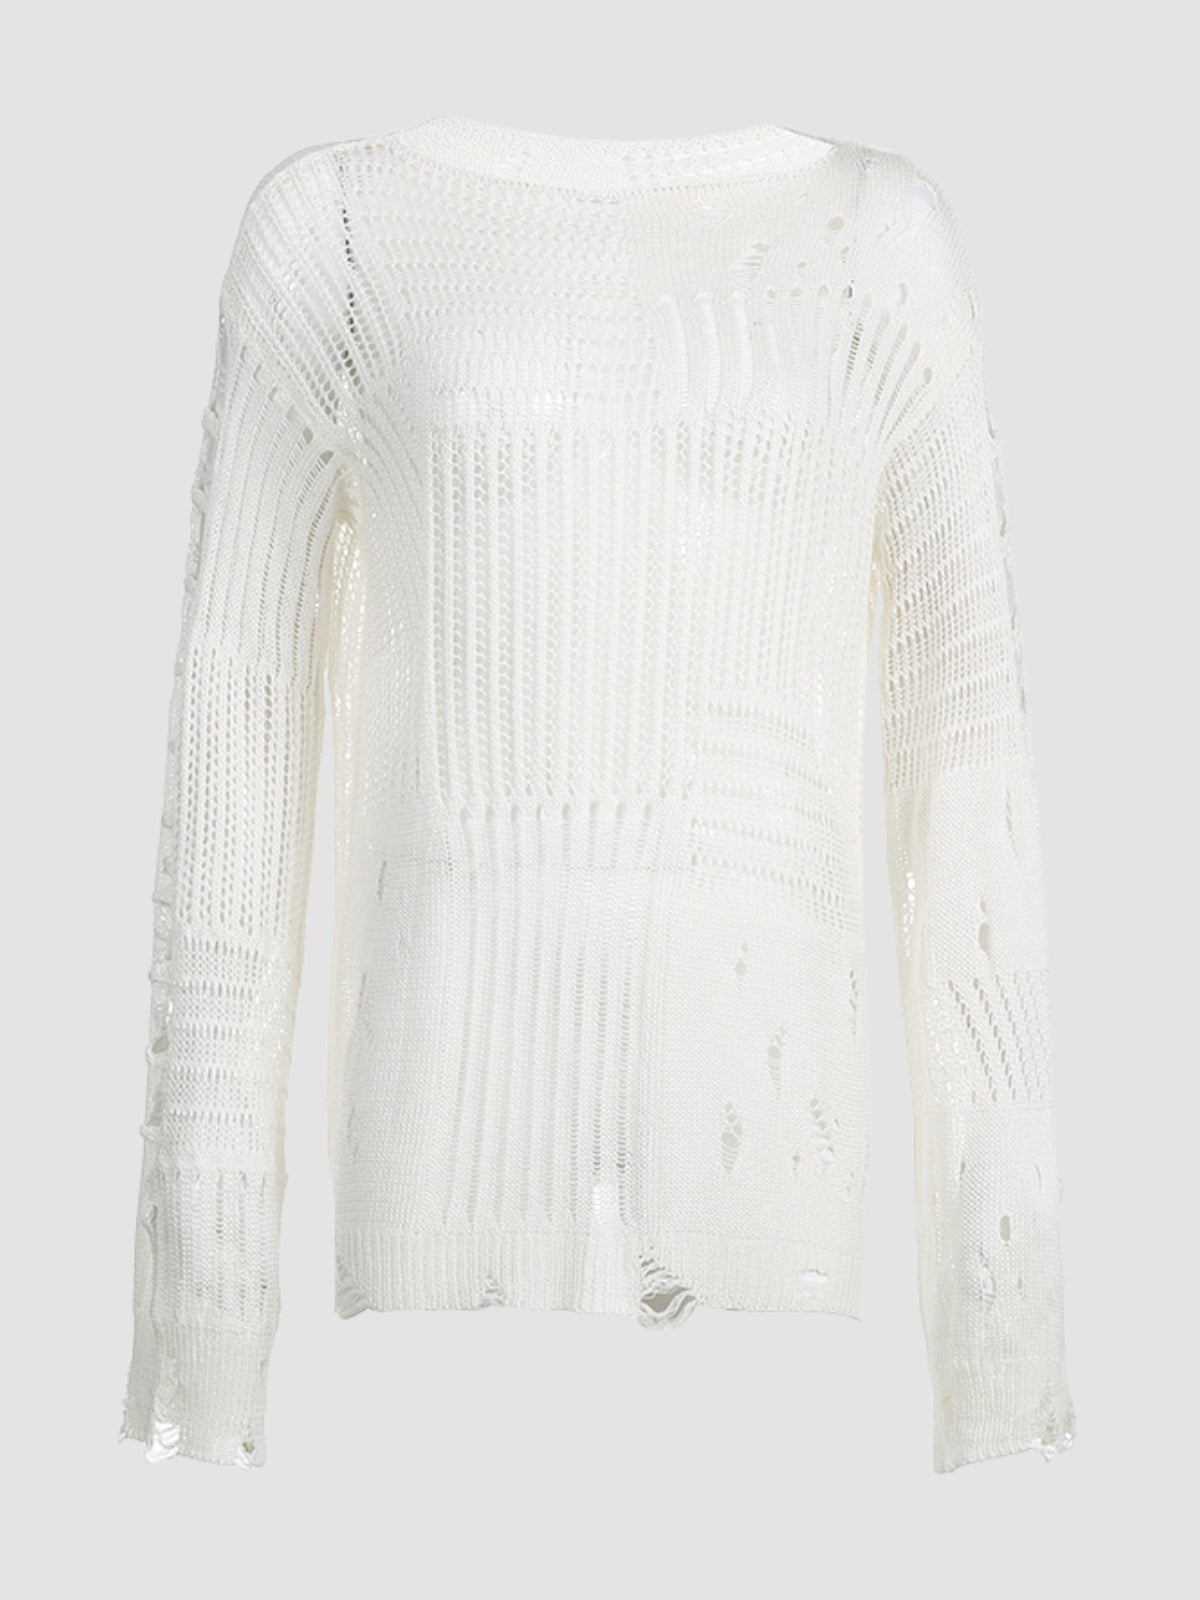 WLS Hollow Woolen Round Neck Long-Sleeved Top